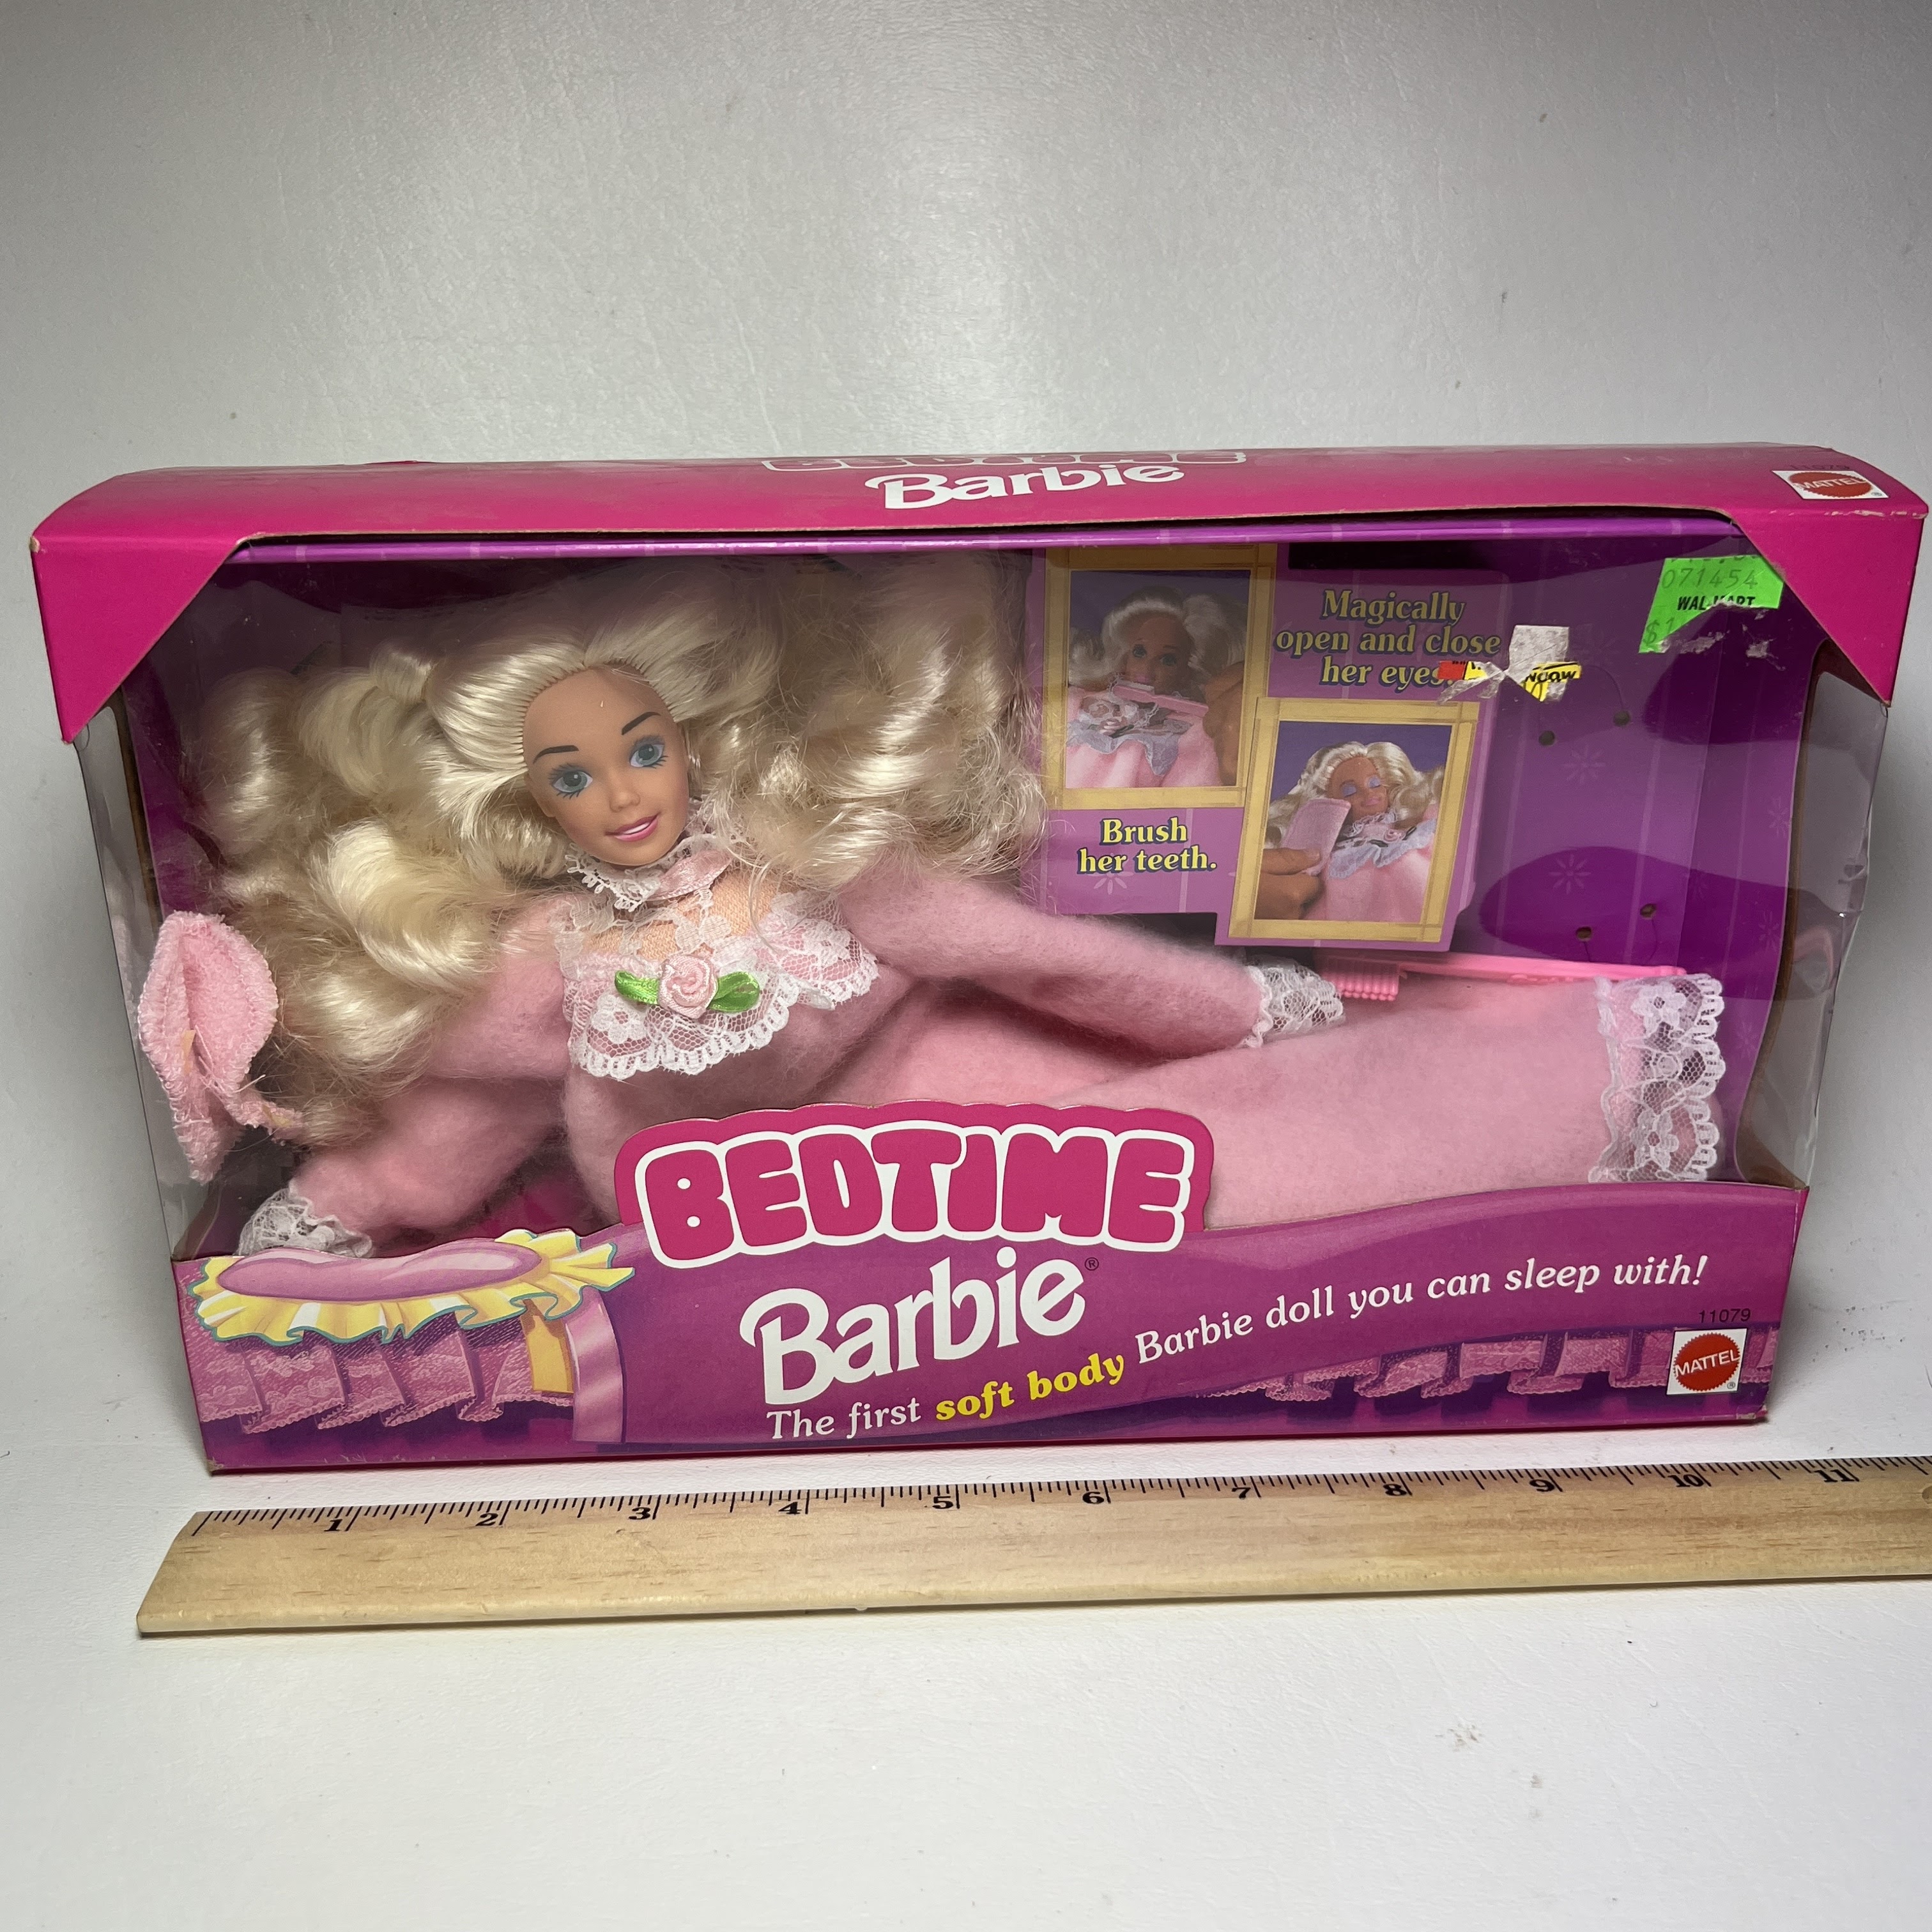 1993 “Bedtime Barbie” Doll The First Soft Body | Proxibid